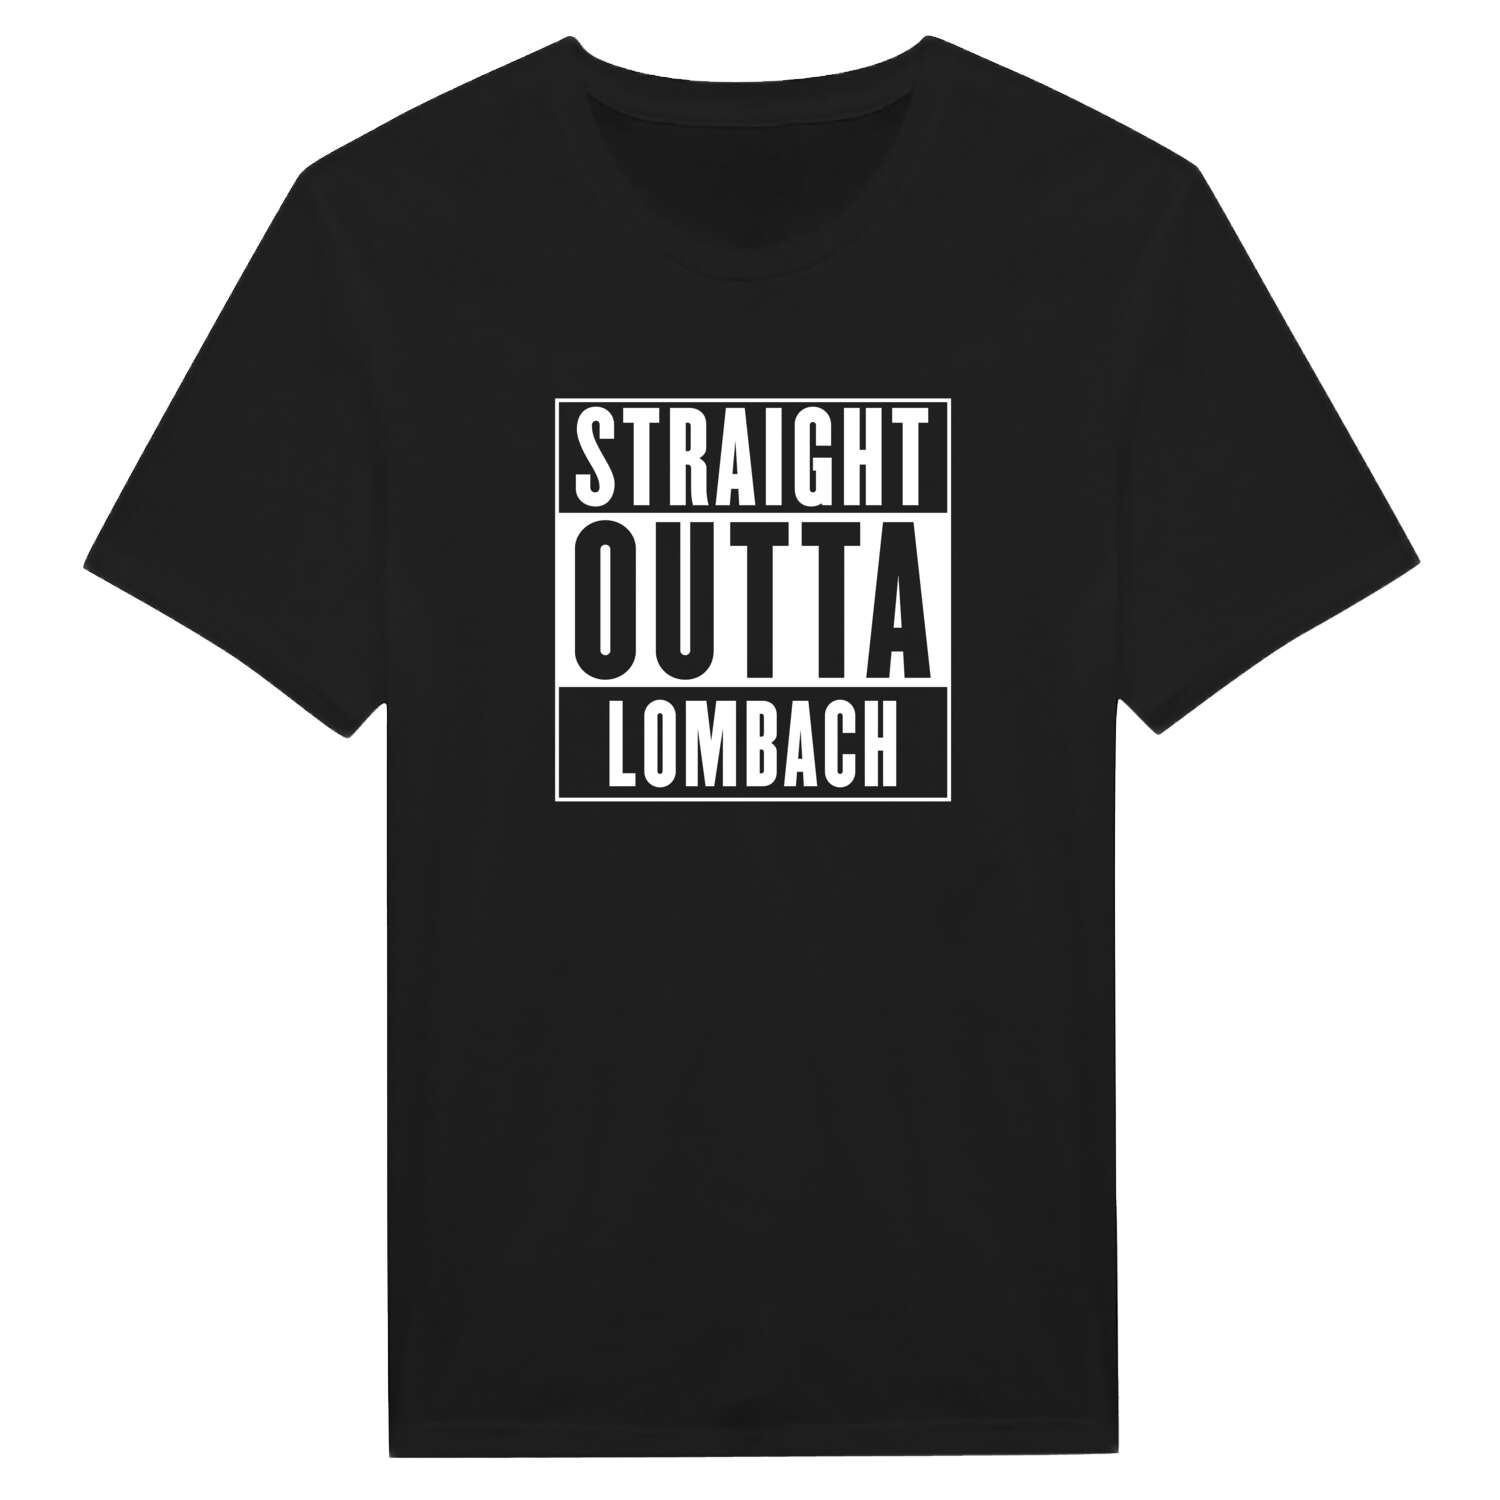 Lombach T-Shirt »Straight Outta«